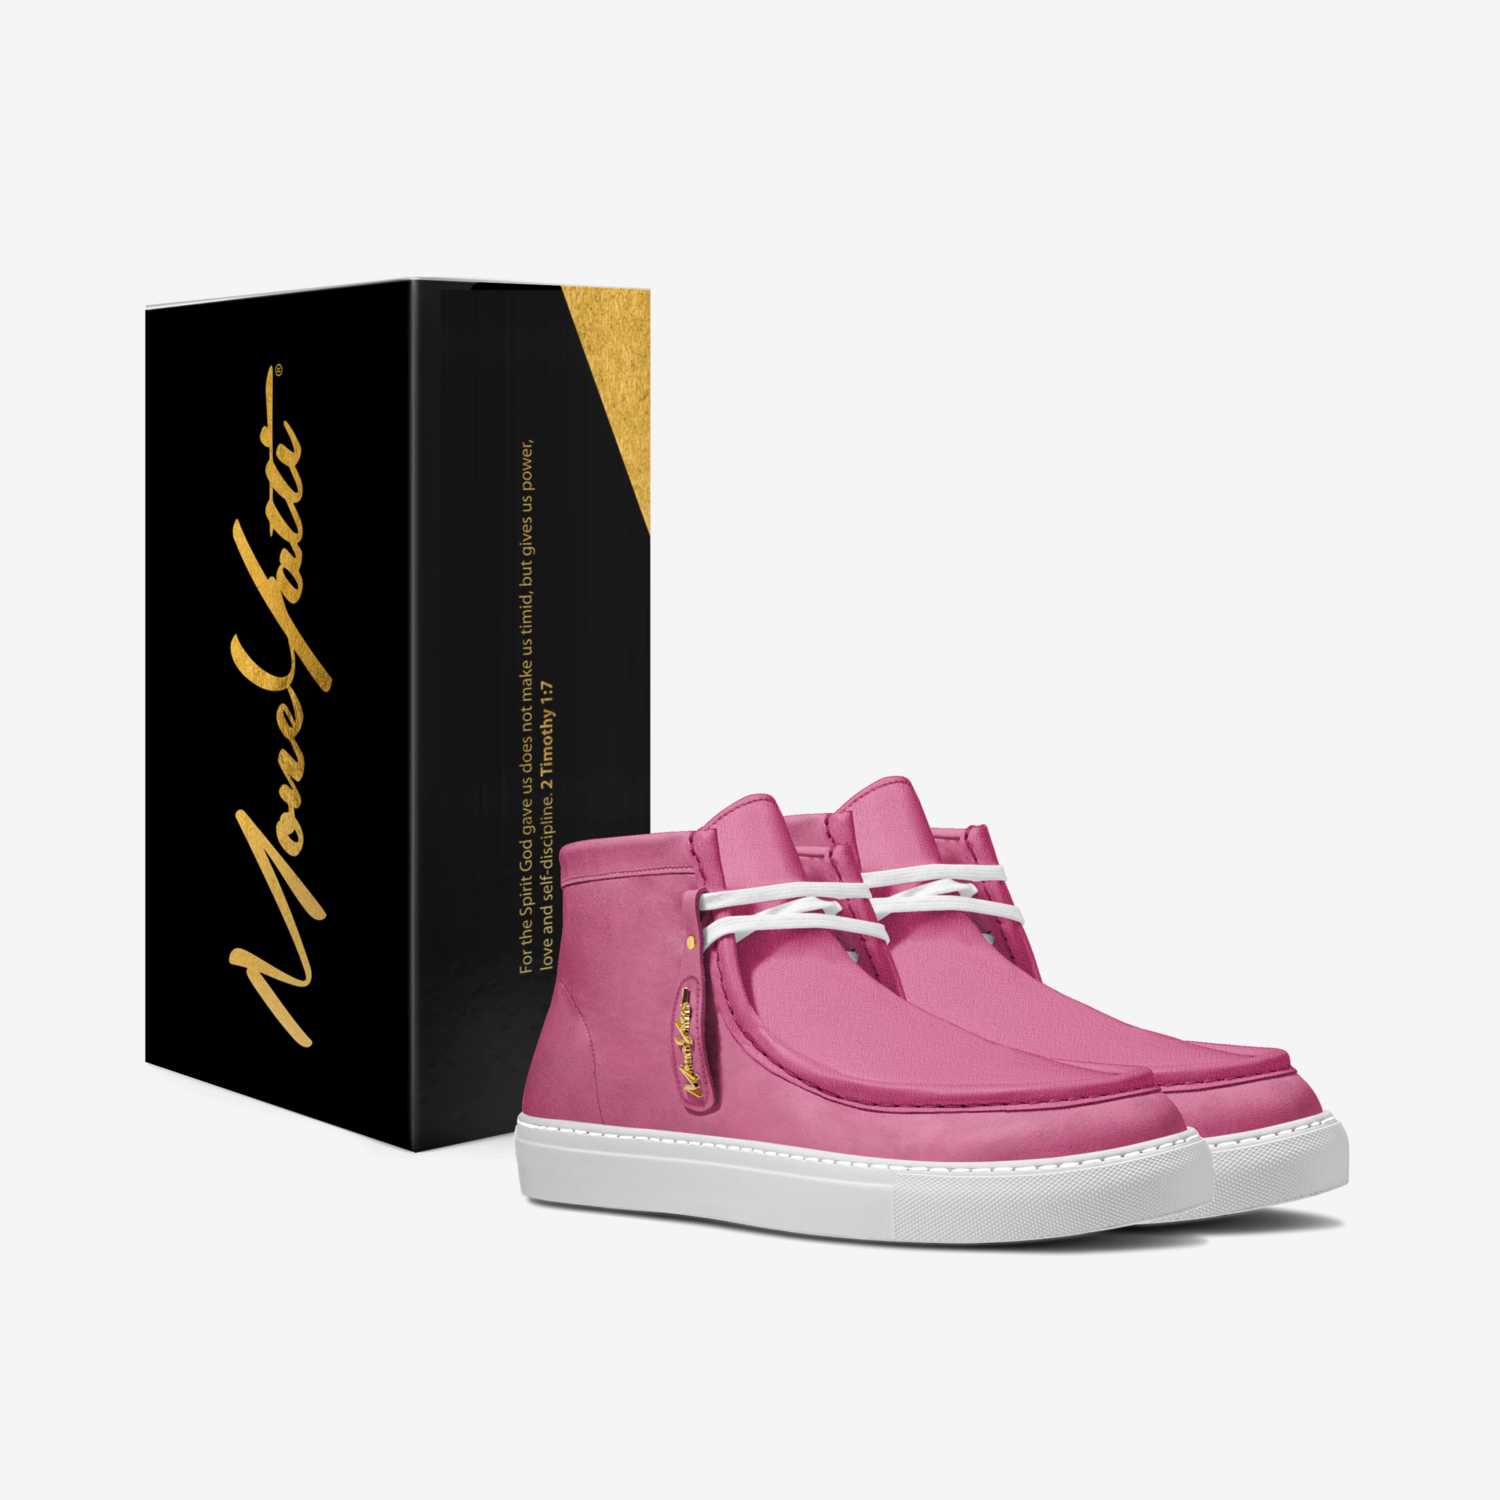 LUX SUEDE 009 custom made in Italy shoes by Moneyatti Brand | Box view